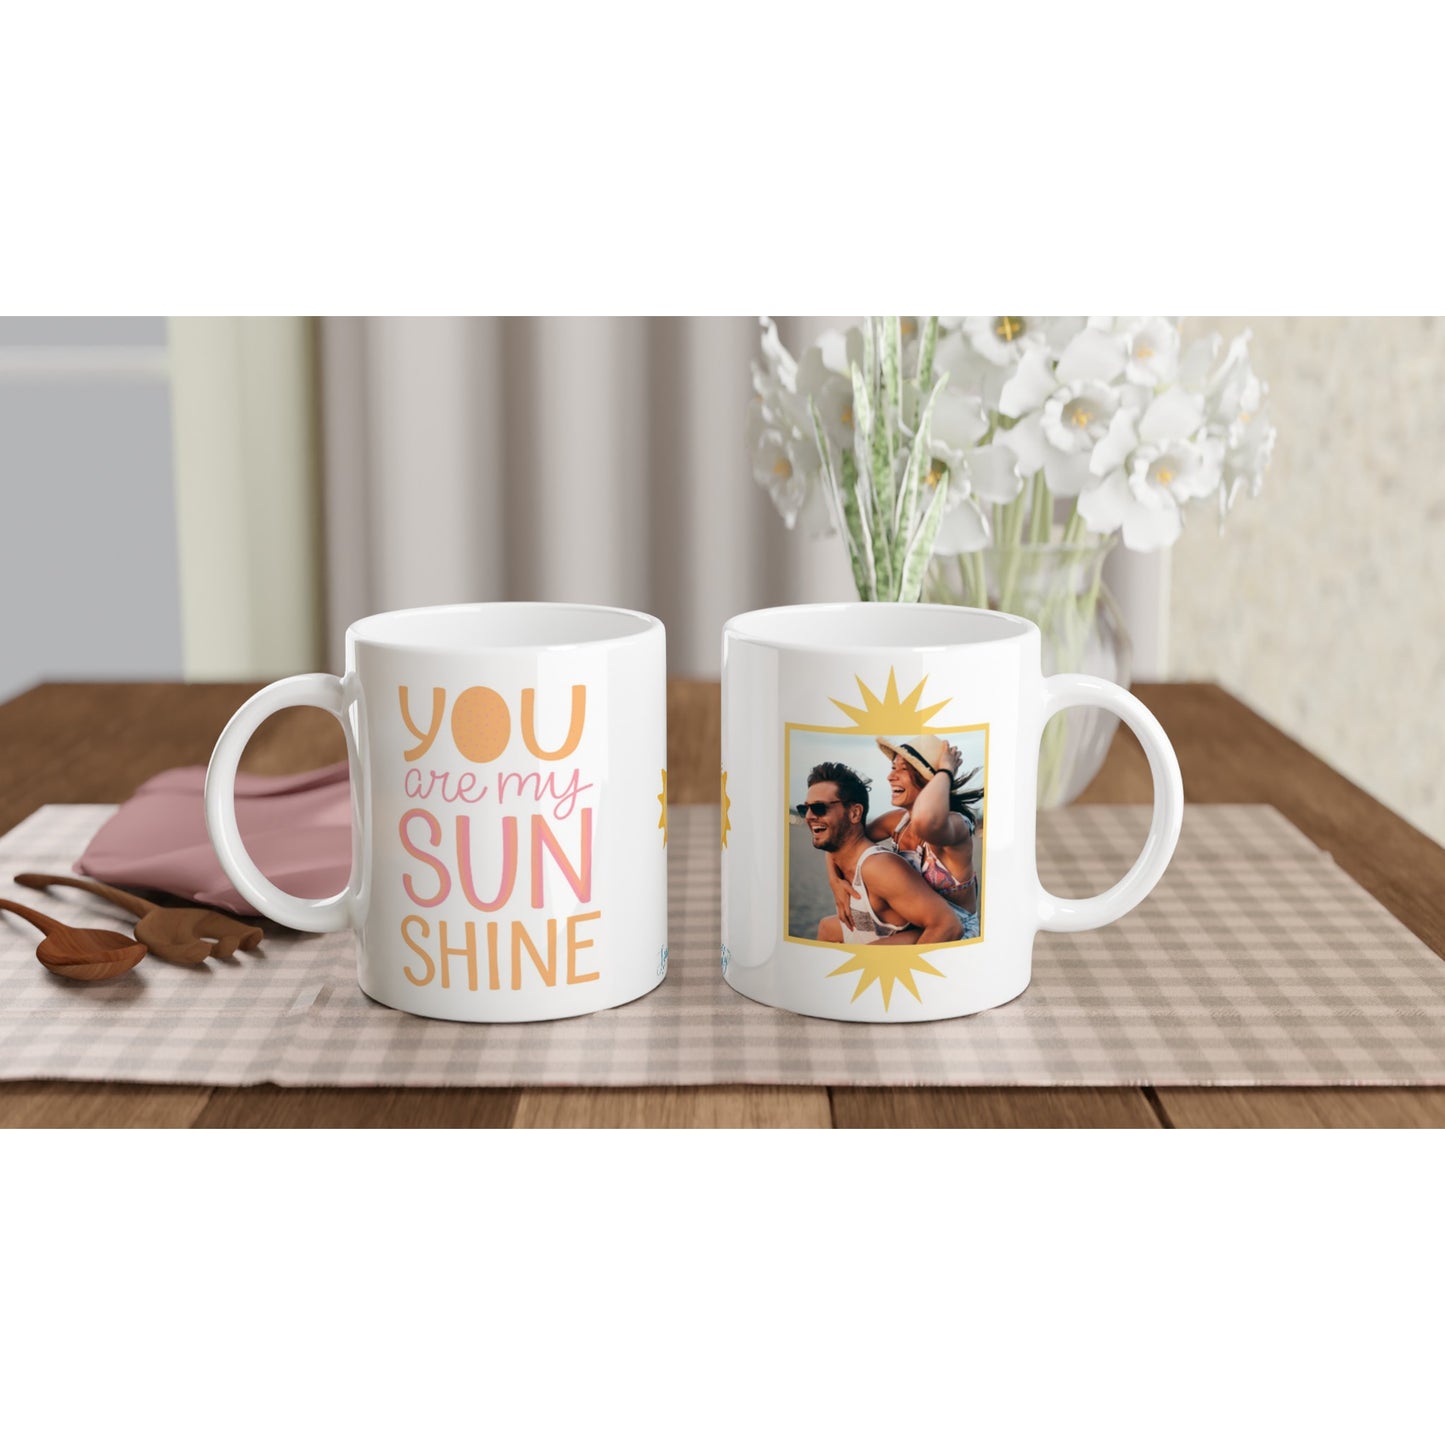 "You are my sunshine." Customizable Photo 11 oz. Mug front and back view